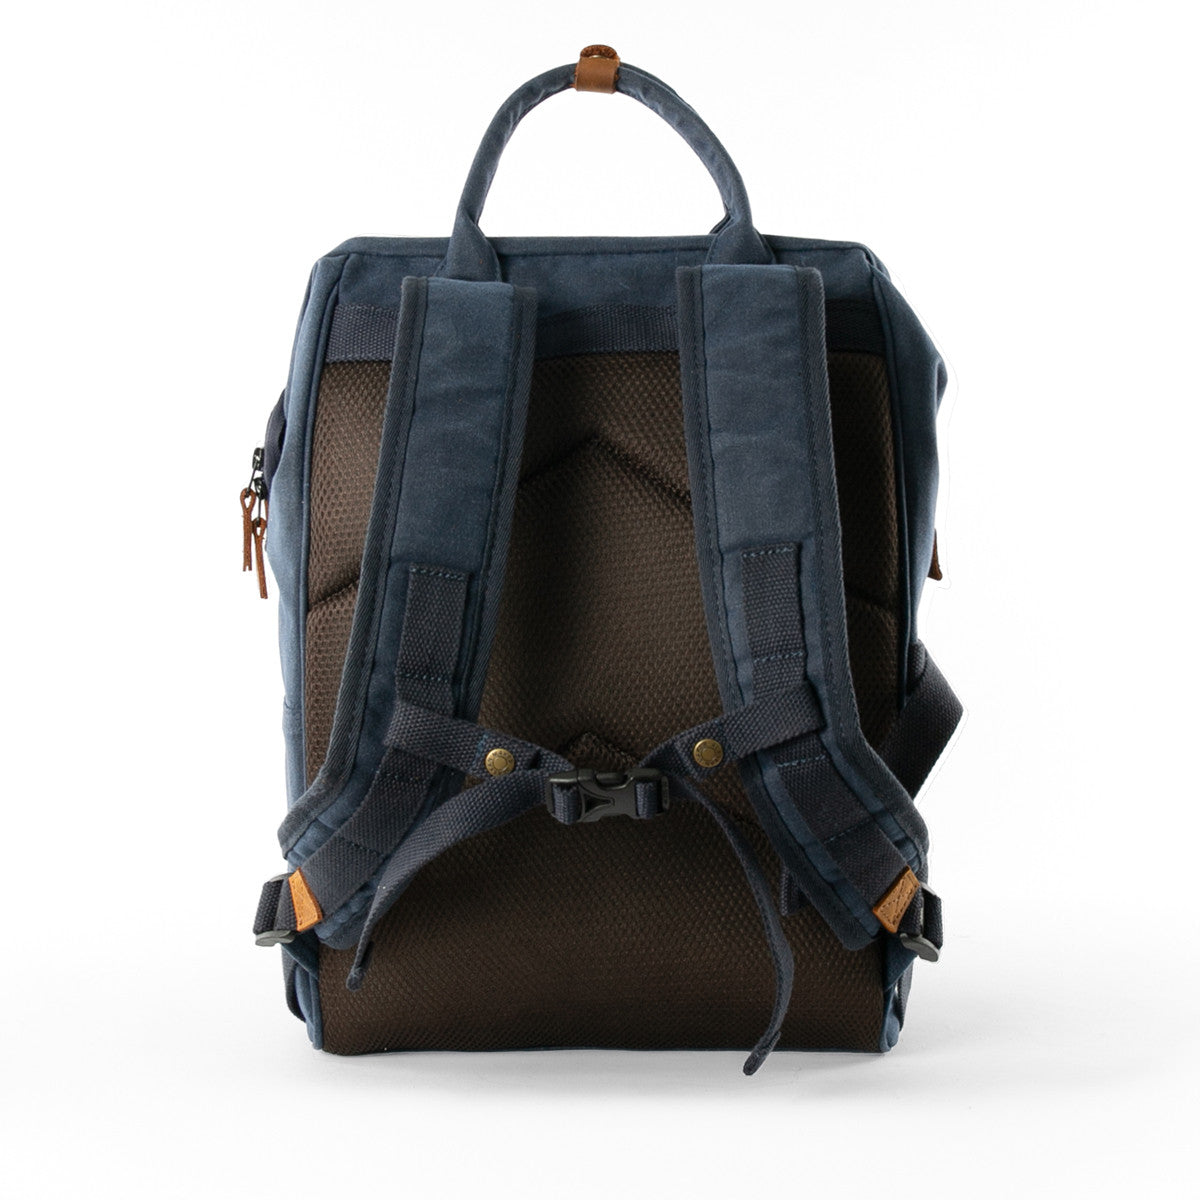 Waxed Canvas Picnic Backpack Cooler